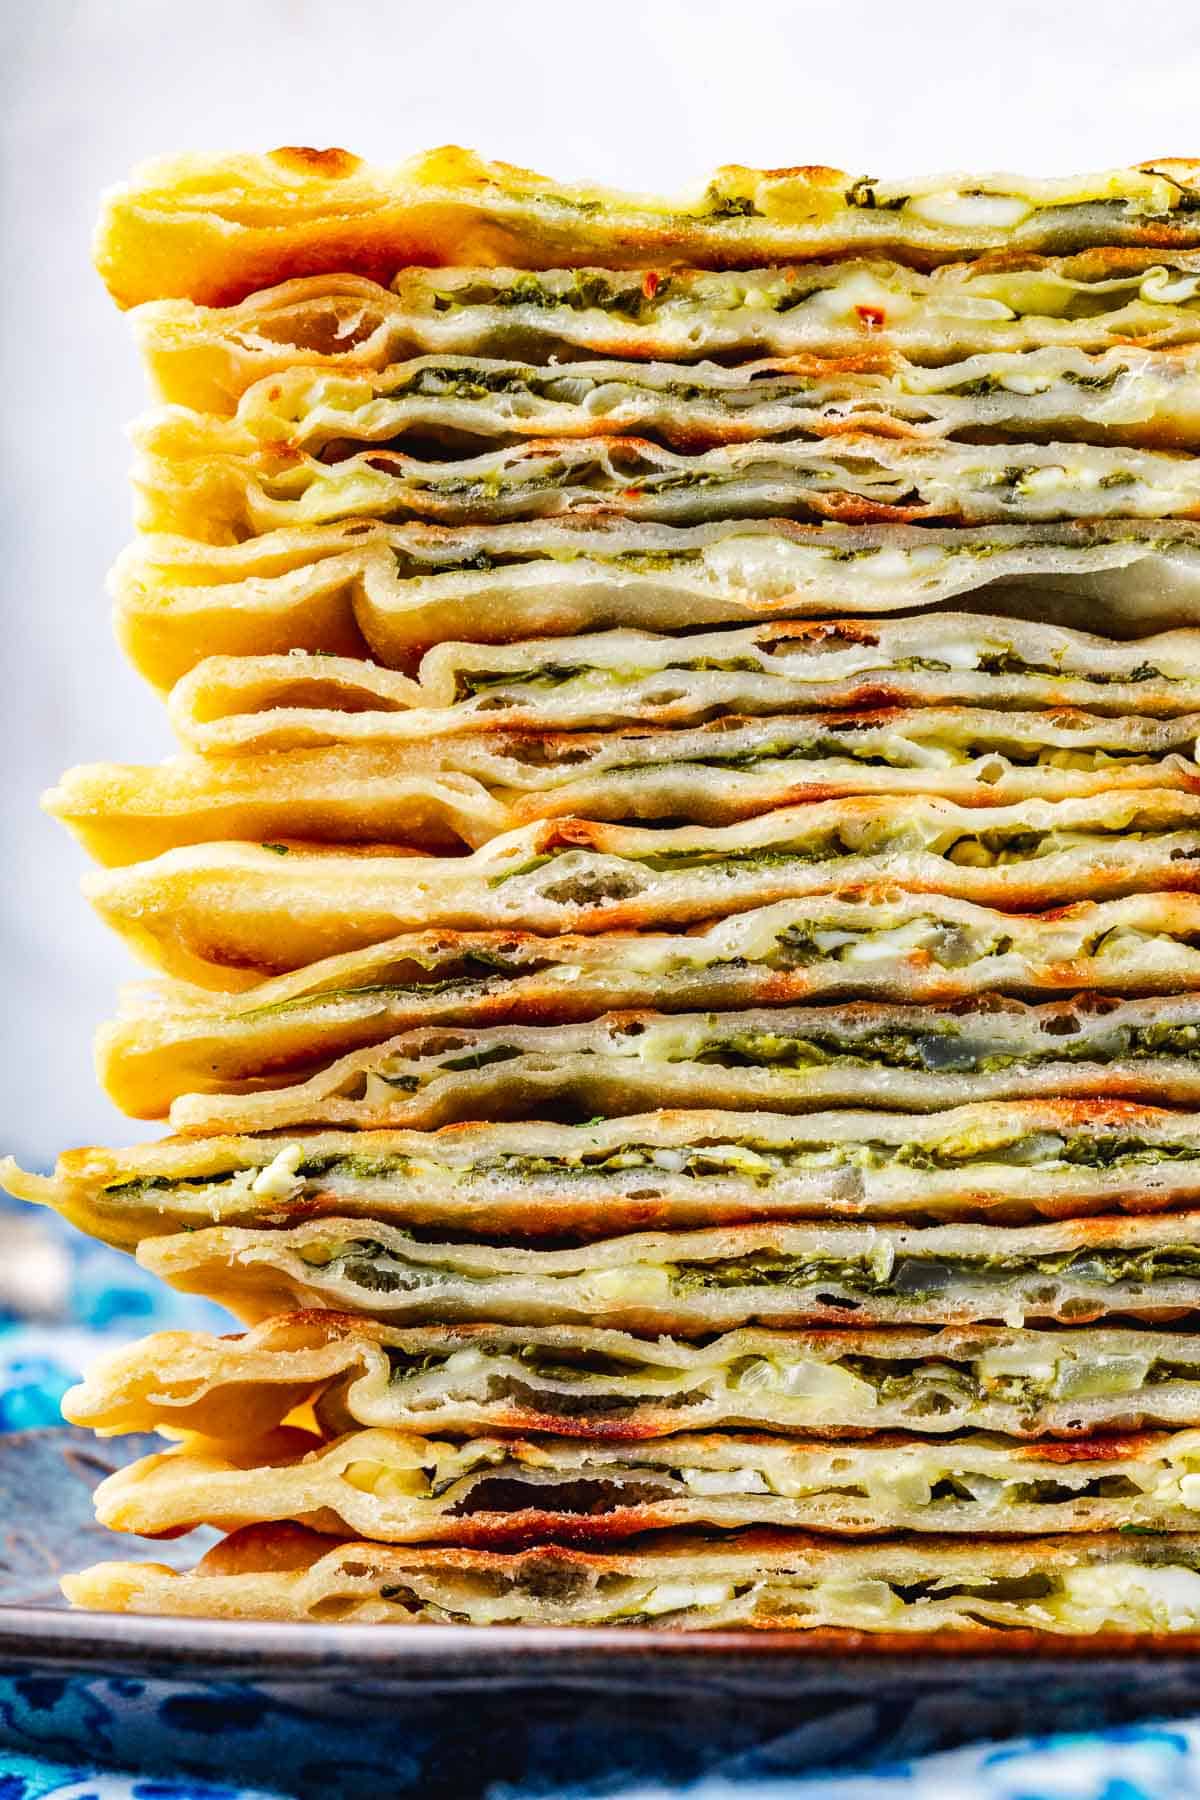 close up of several gozleme turkish flatbread triangles stacked on a blue plate.